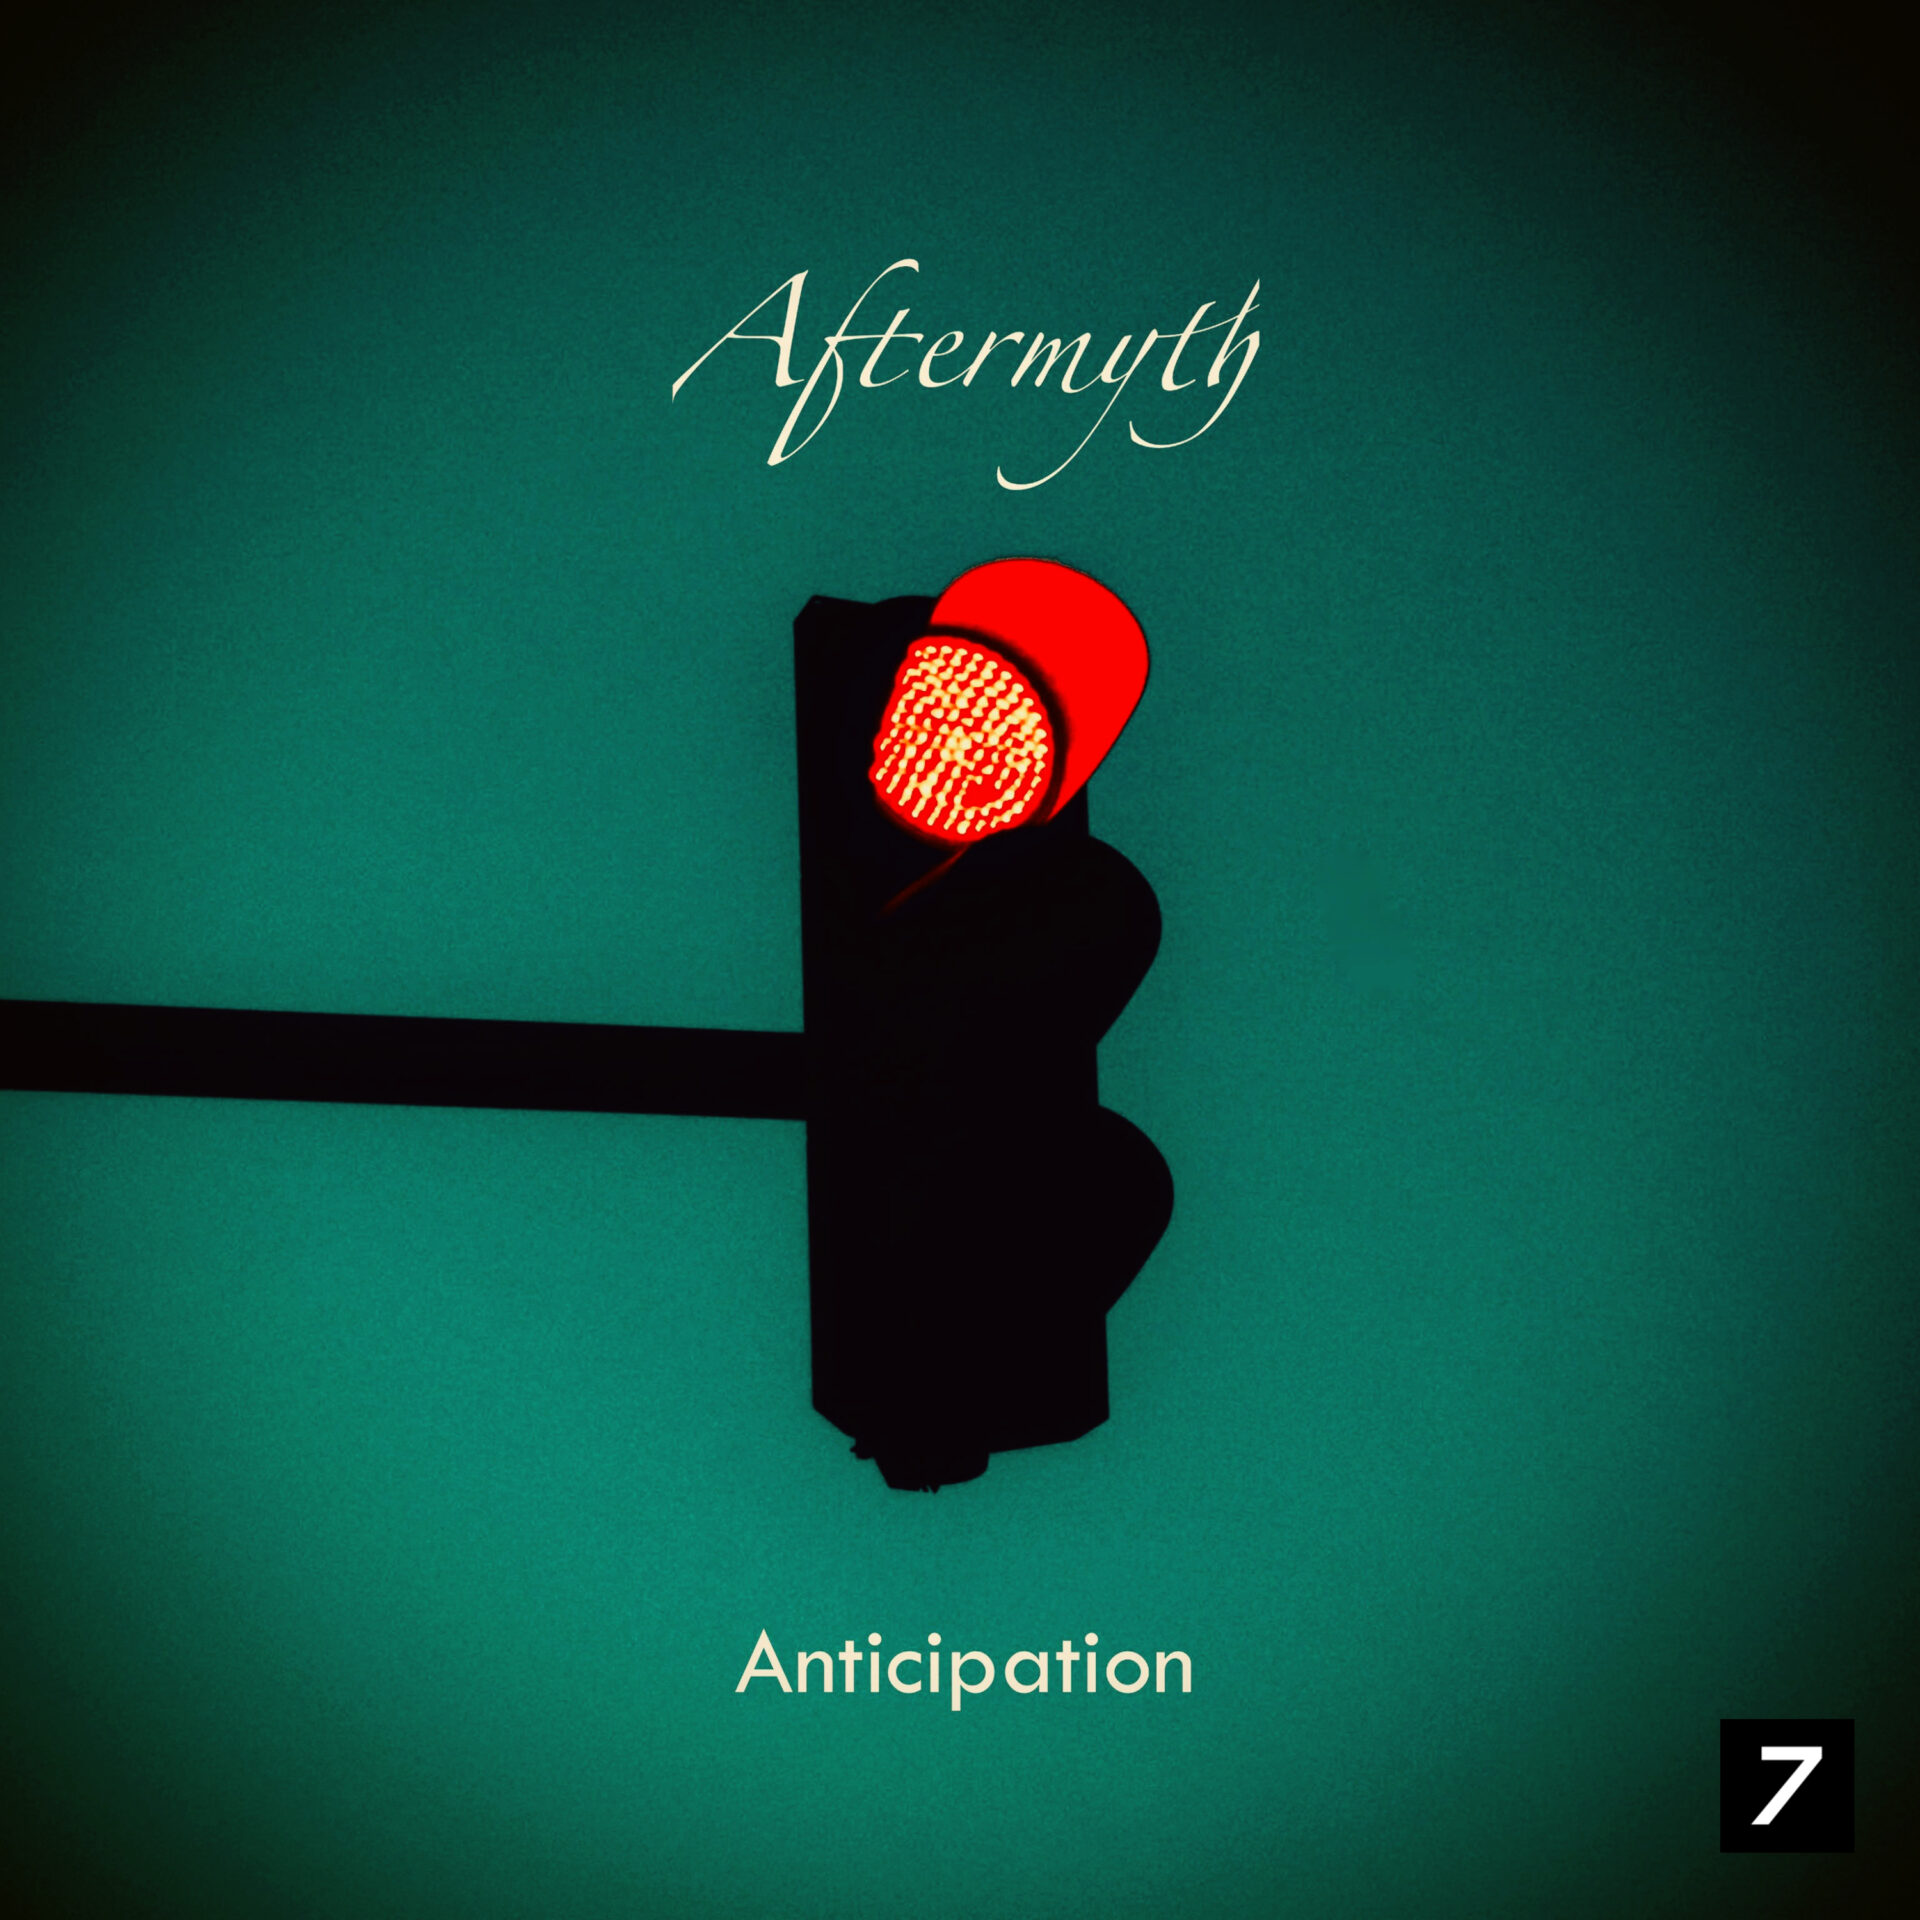 Anticipation now available